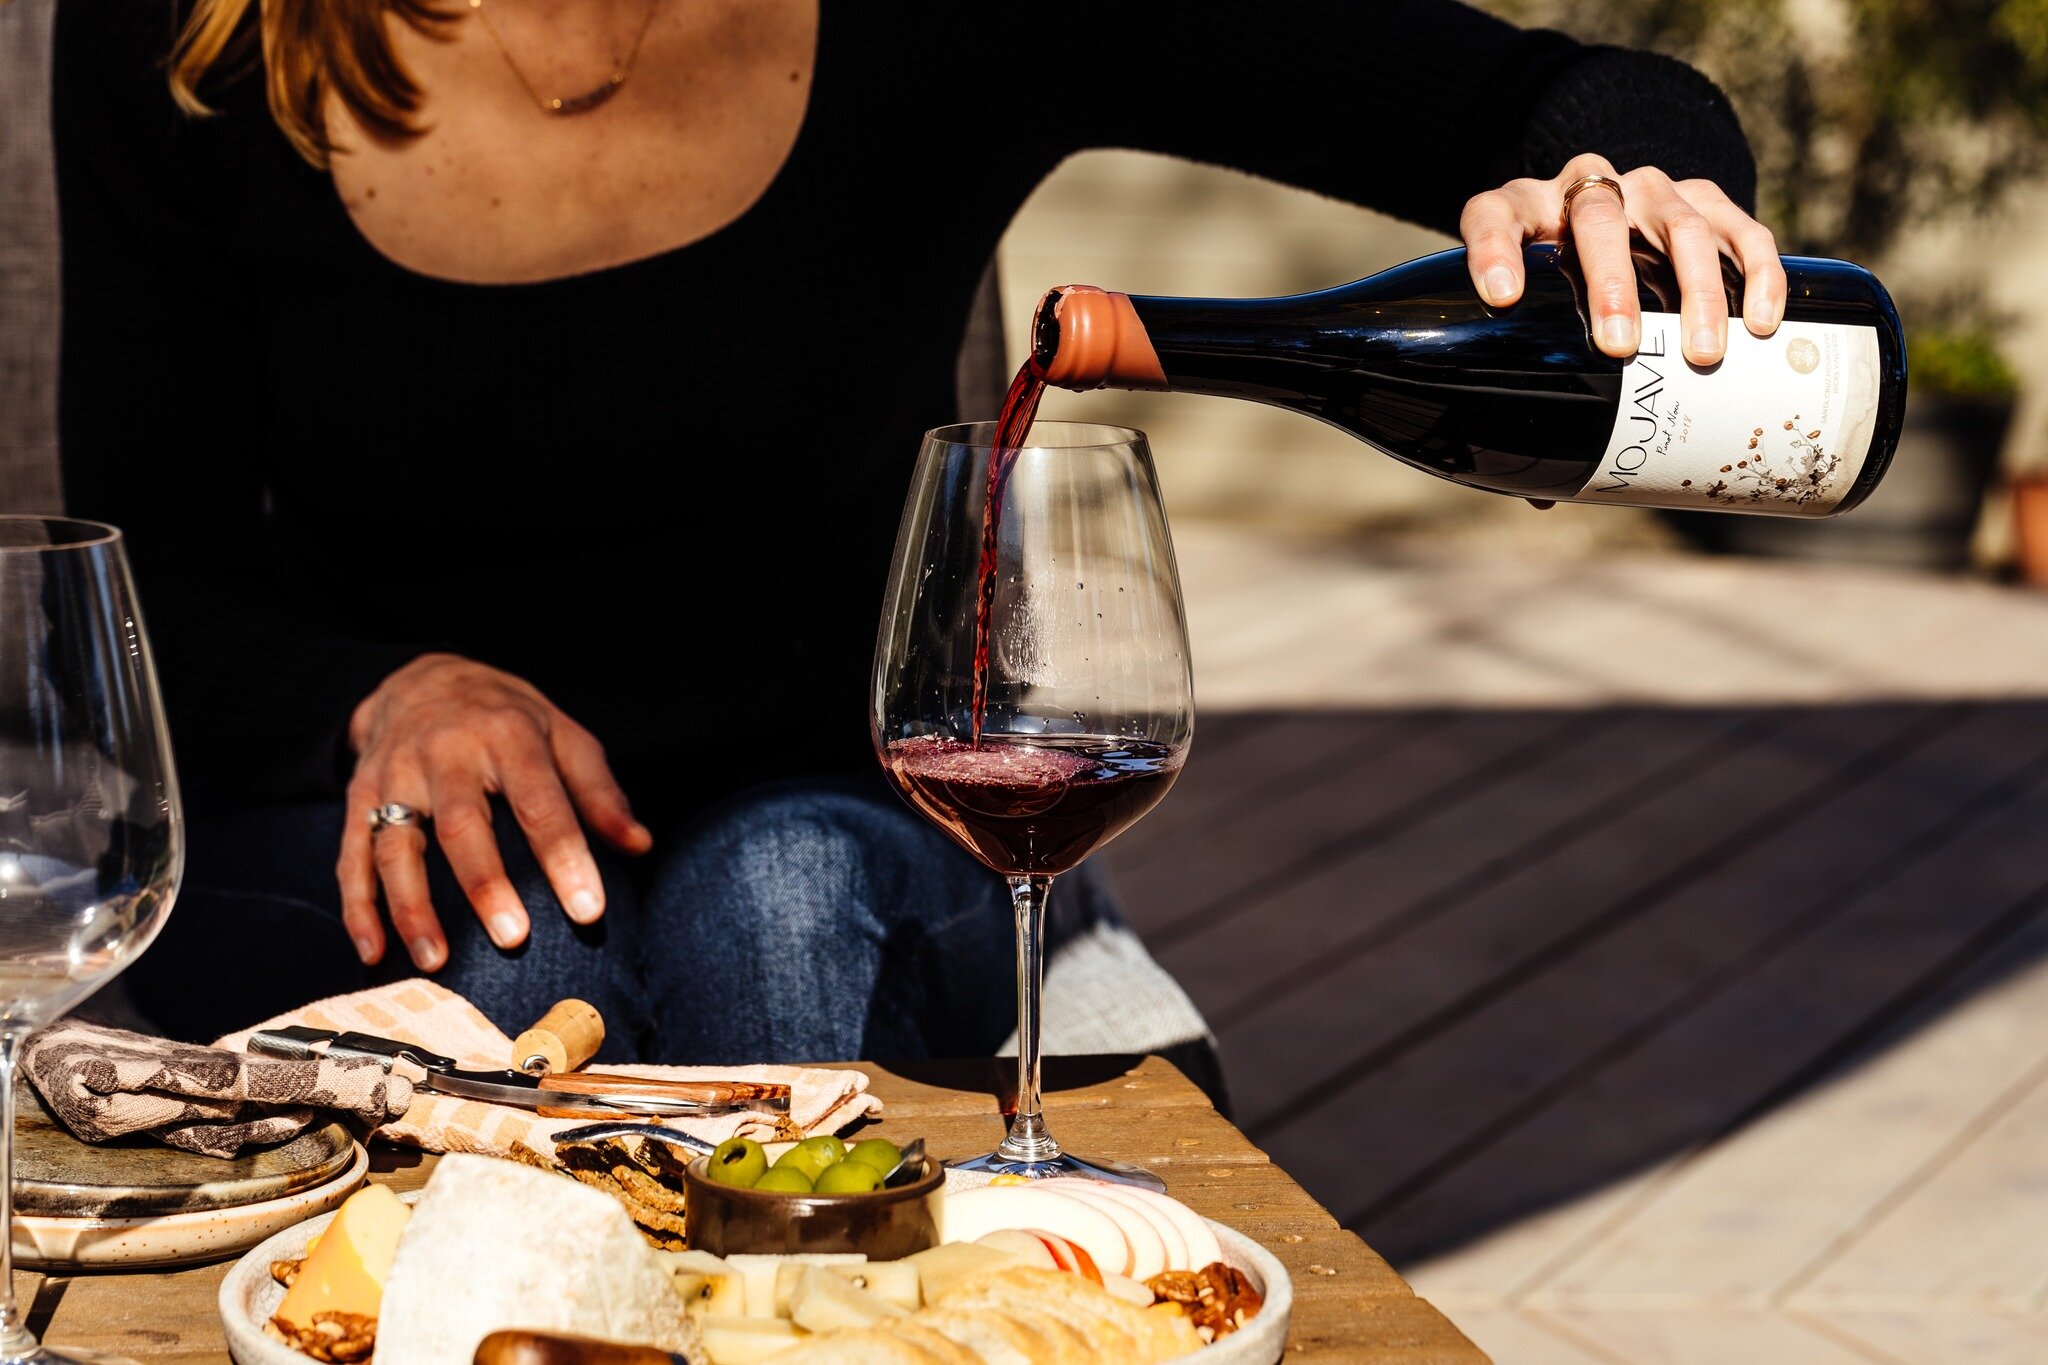 No holiday is complete without a bottle of Mojave Wines Pinot Noir on the table. It's a must-have for us!